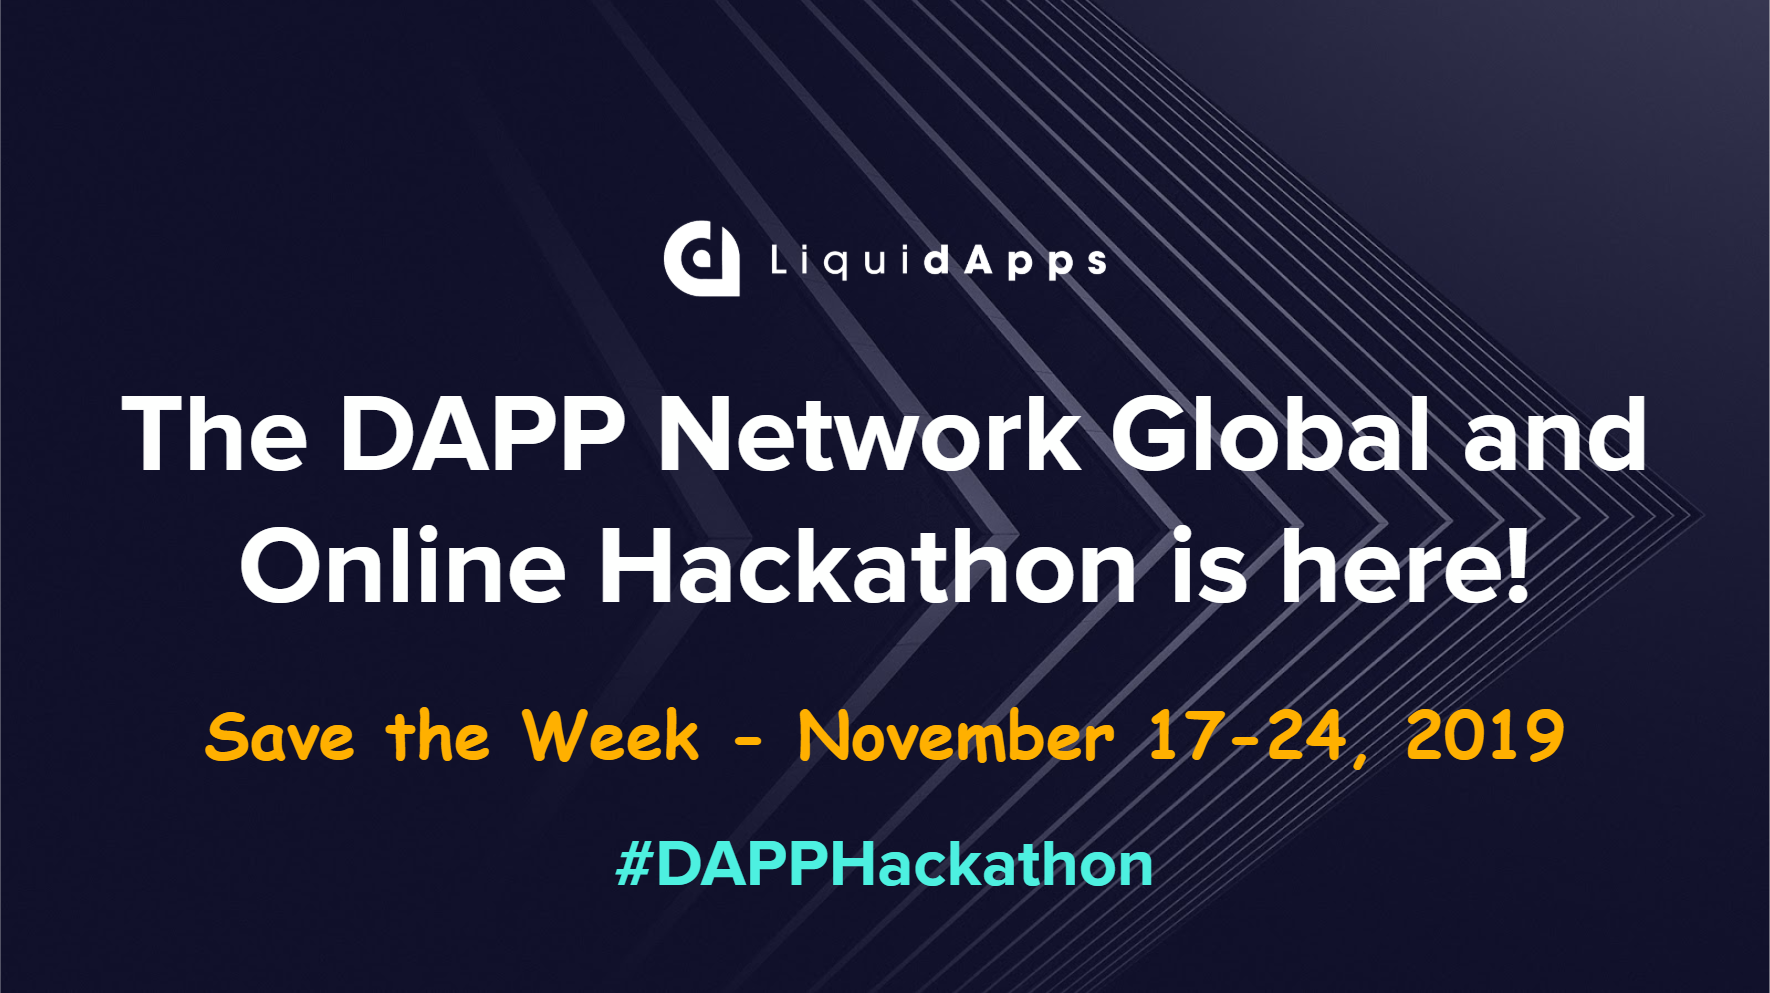 The DAPP Network Hackathon is officially started